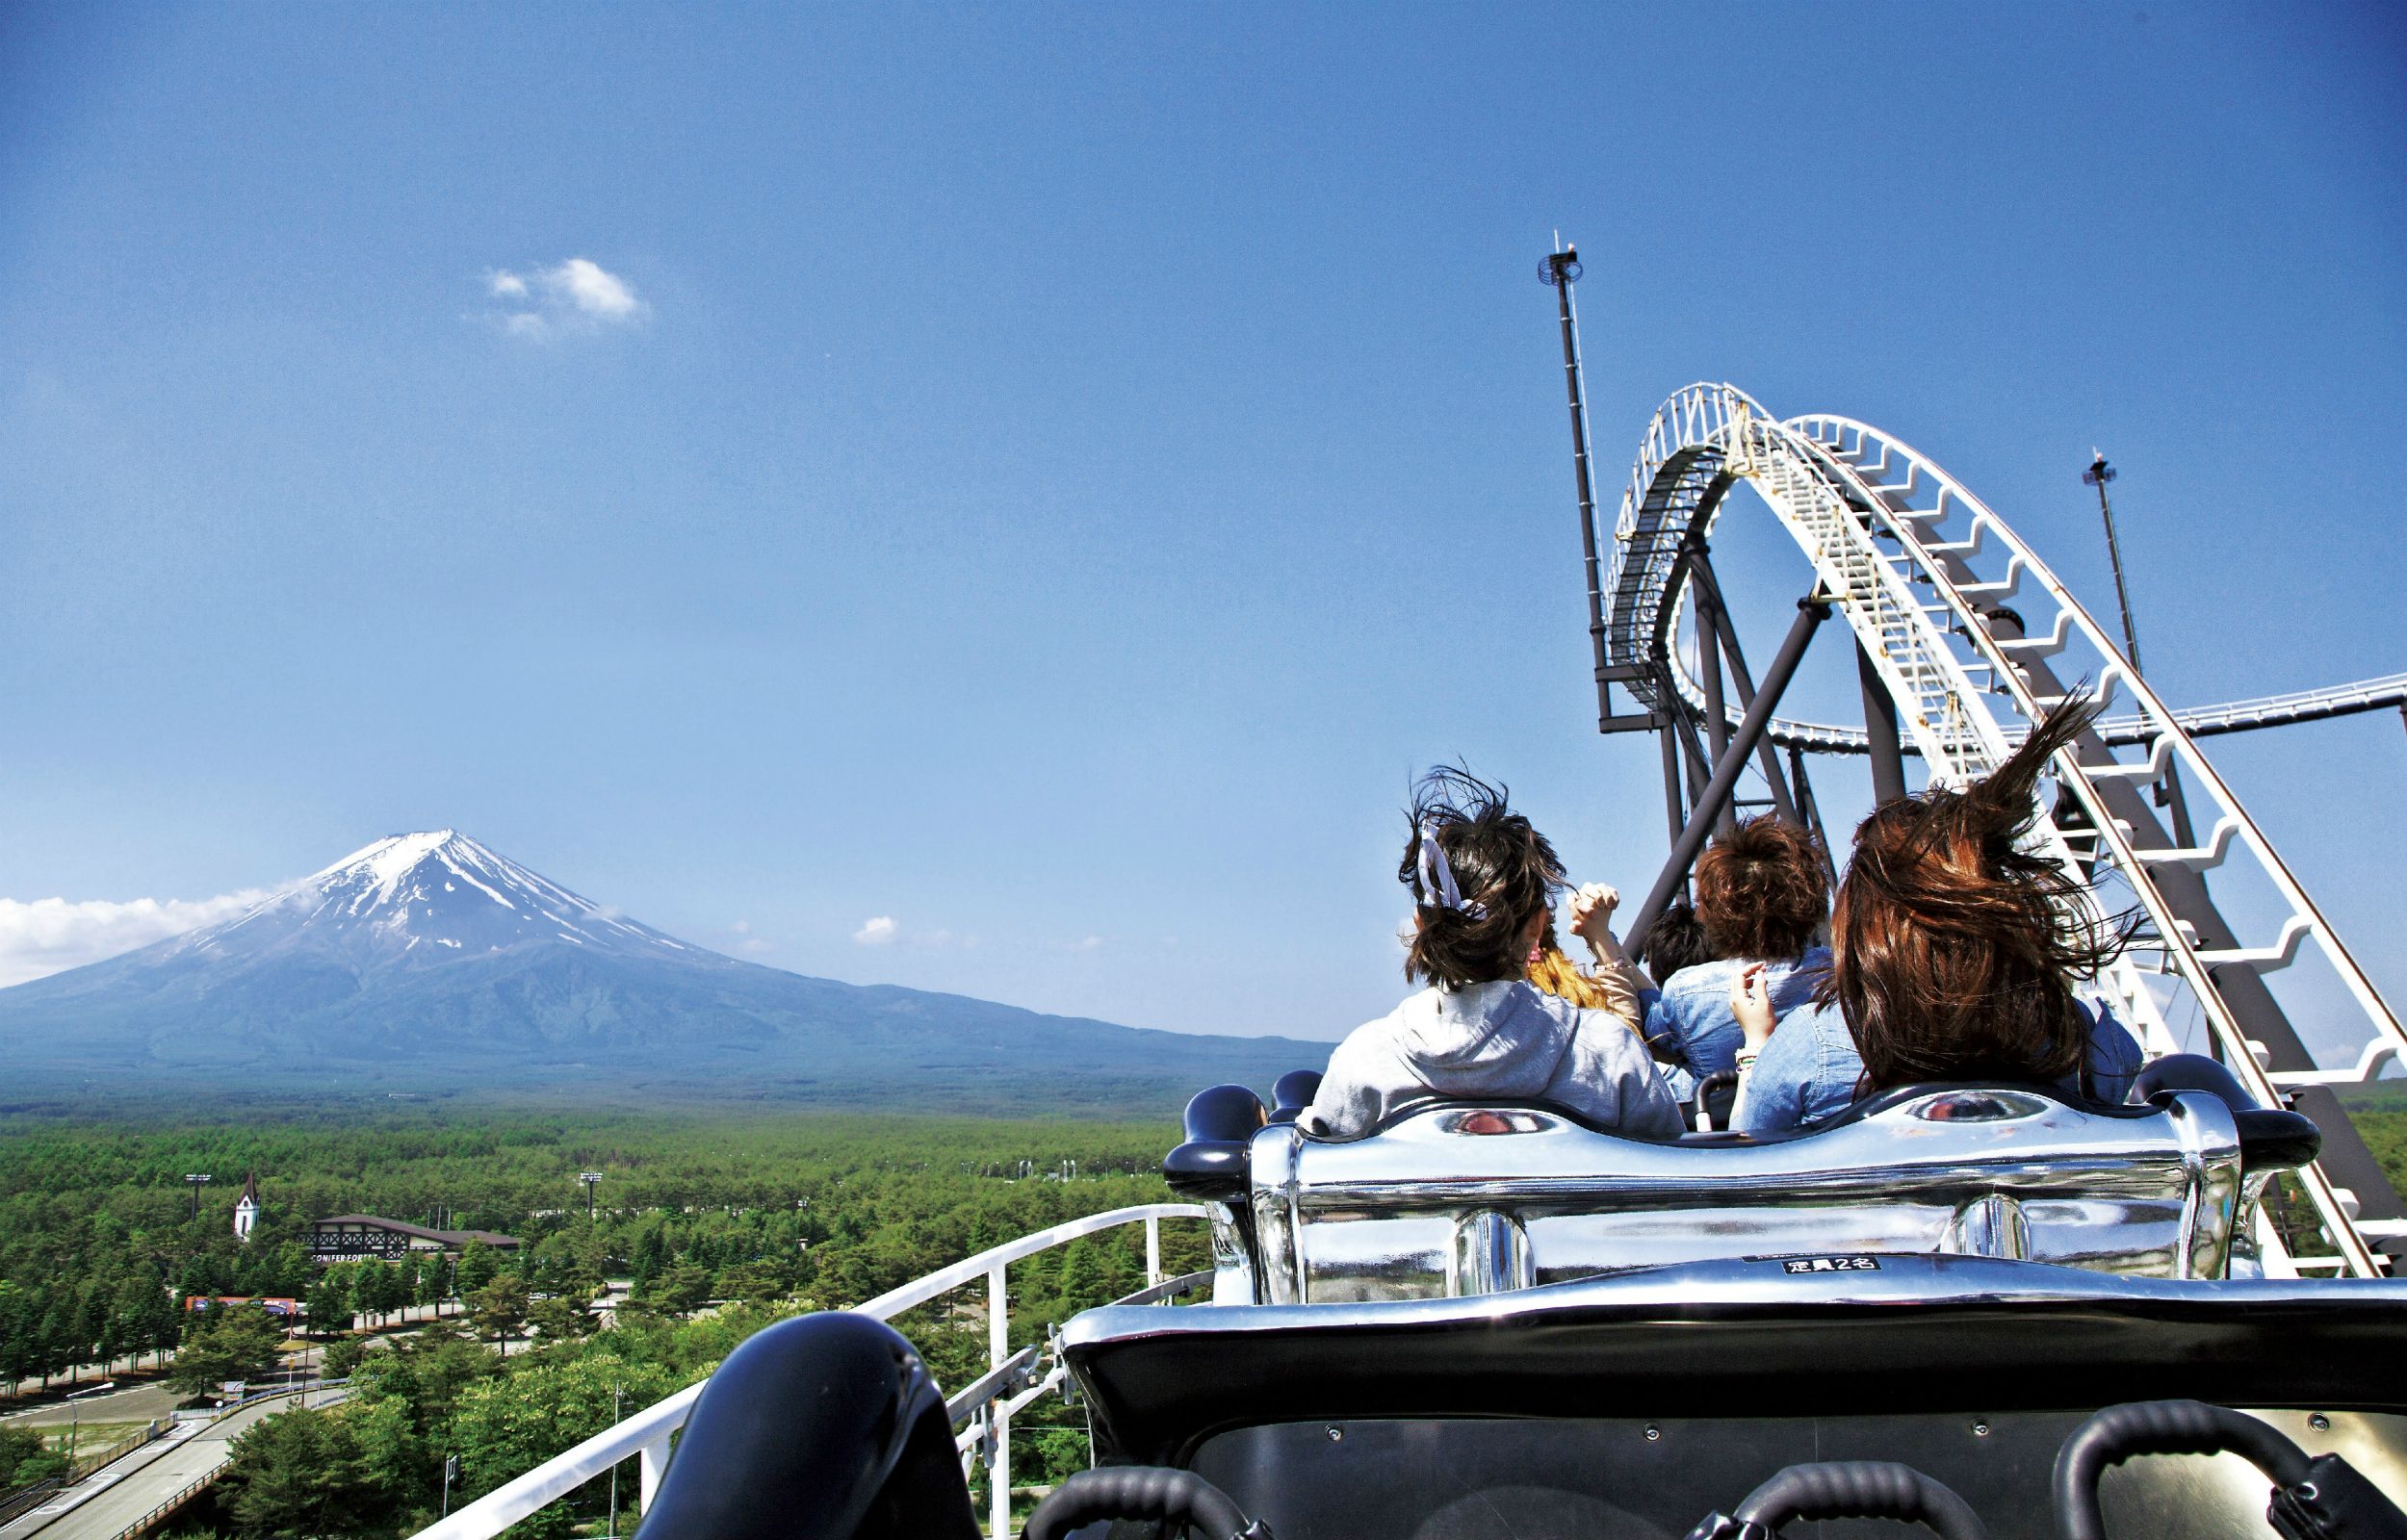 Fuji-Q Highland Free Pass with Priority Admission (Early Park Admission)